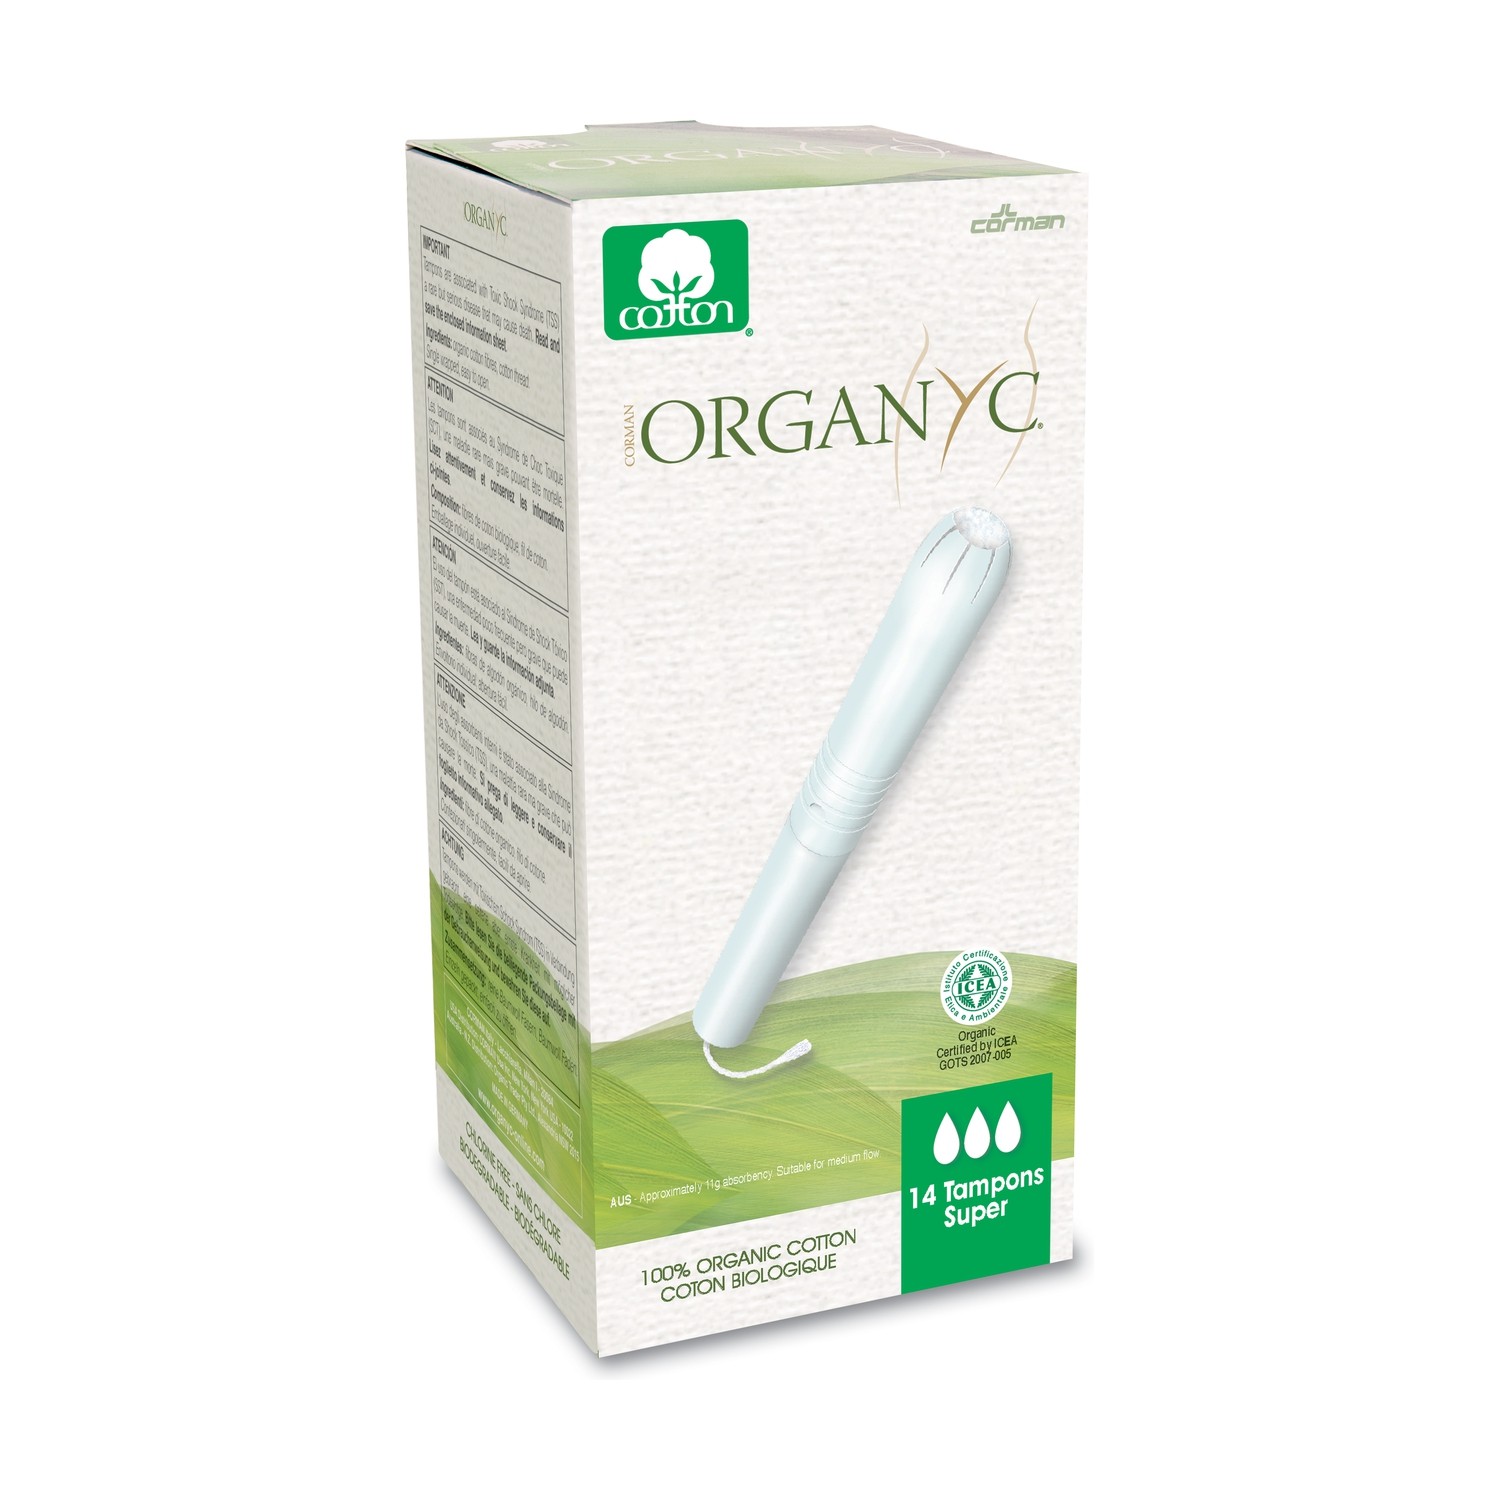 Organyc Organic Cotton Tampons with Applicator Super